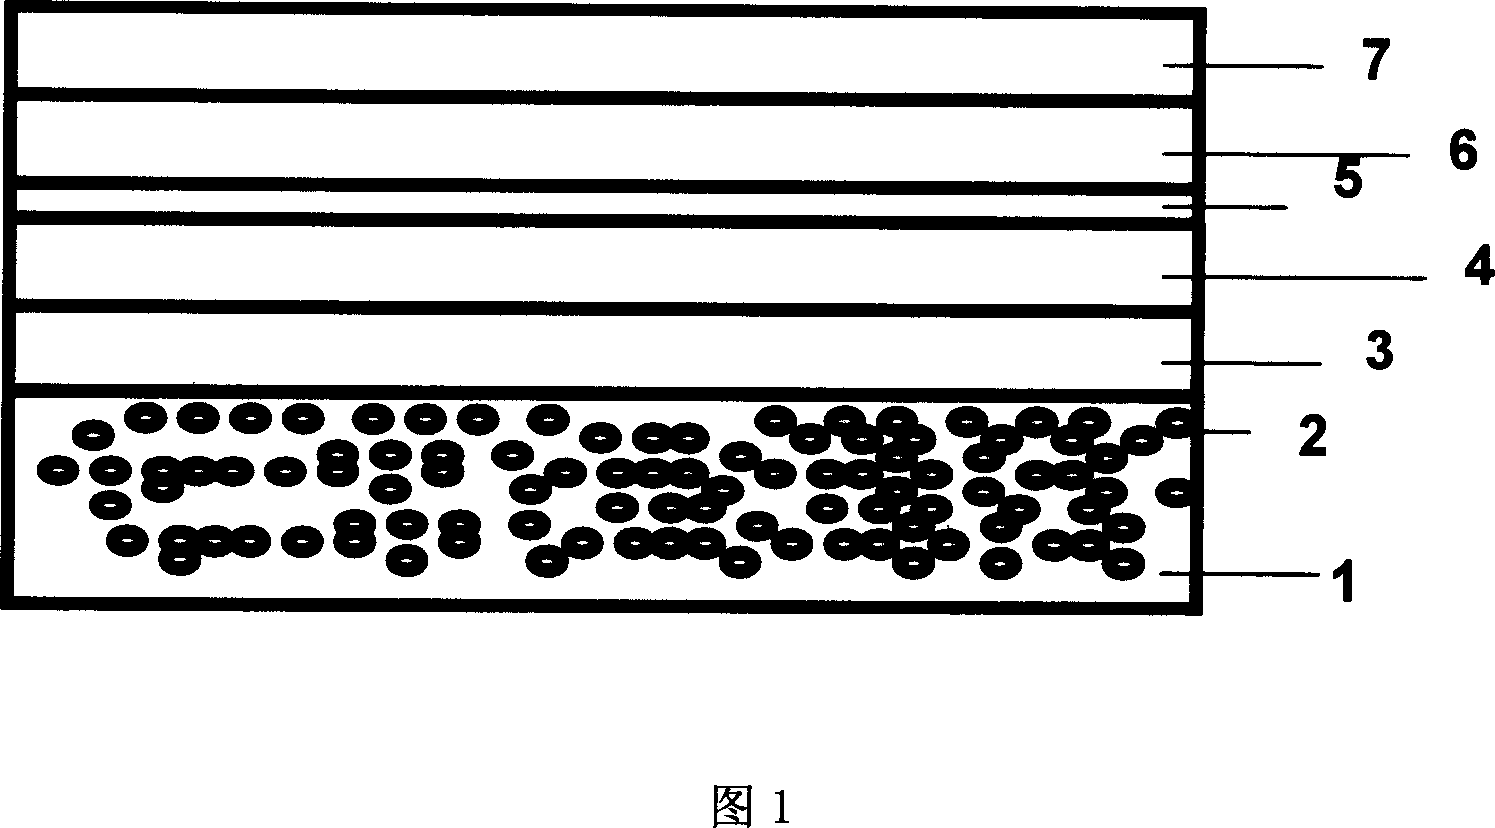 Structure of low temperature solid oxide fuel cell supported by porous metal